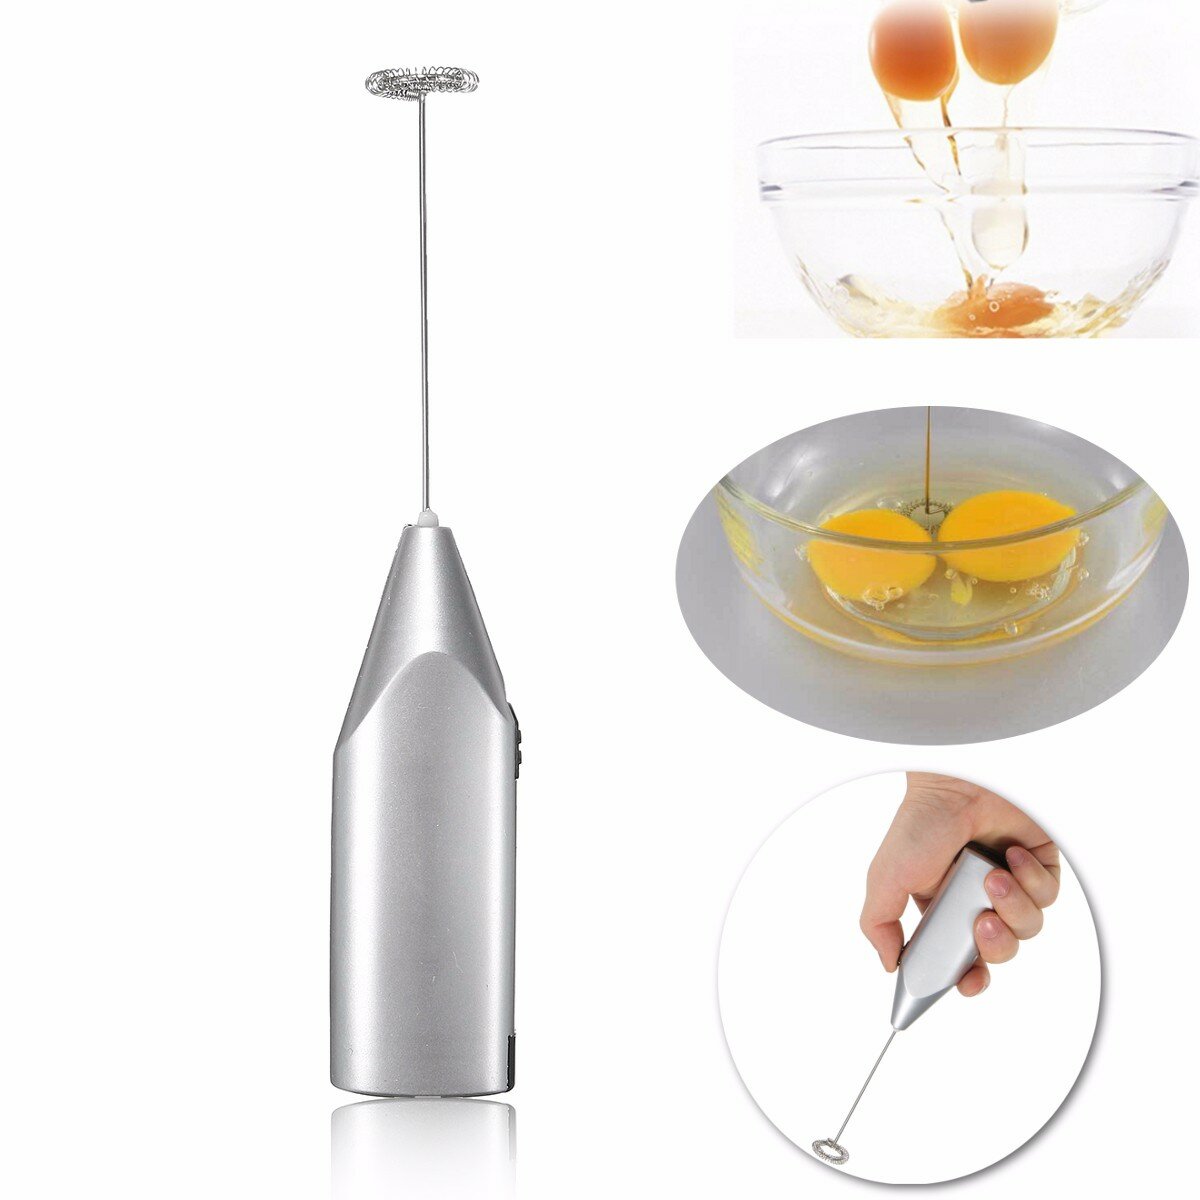 Mini Electric Battery Powered Whisk Coffee Milk Mixer Stirrer Frother Egg Foamer Mixer